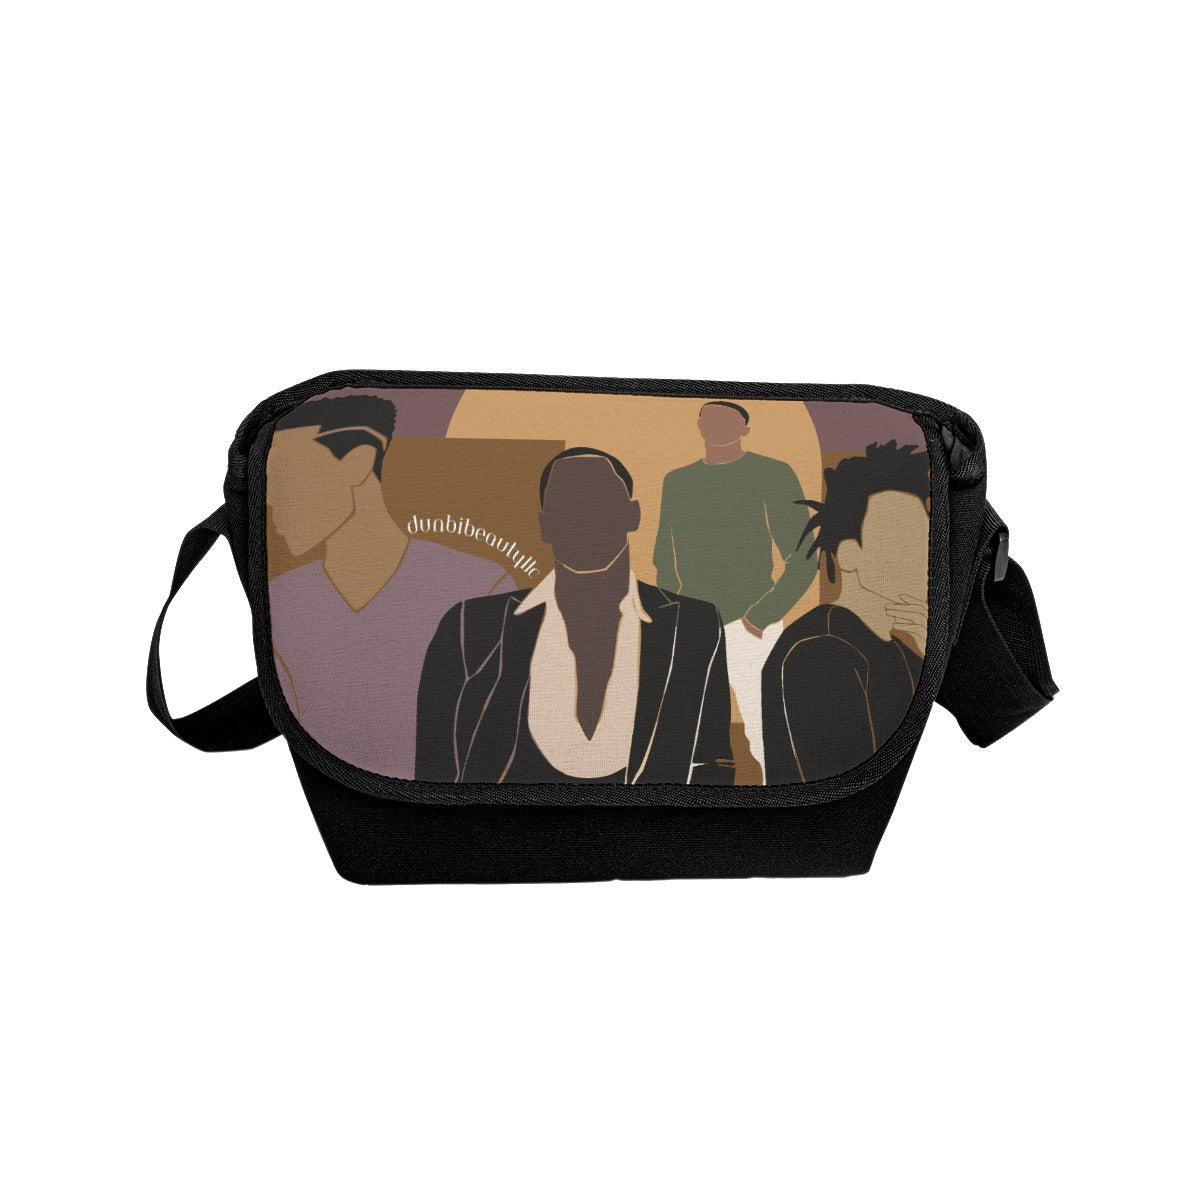 Messenger Bags  Black Men, Music, Sophistication, Style, Youth, Style #2 (Designed by Dunbi)